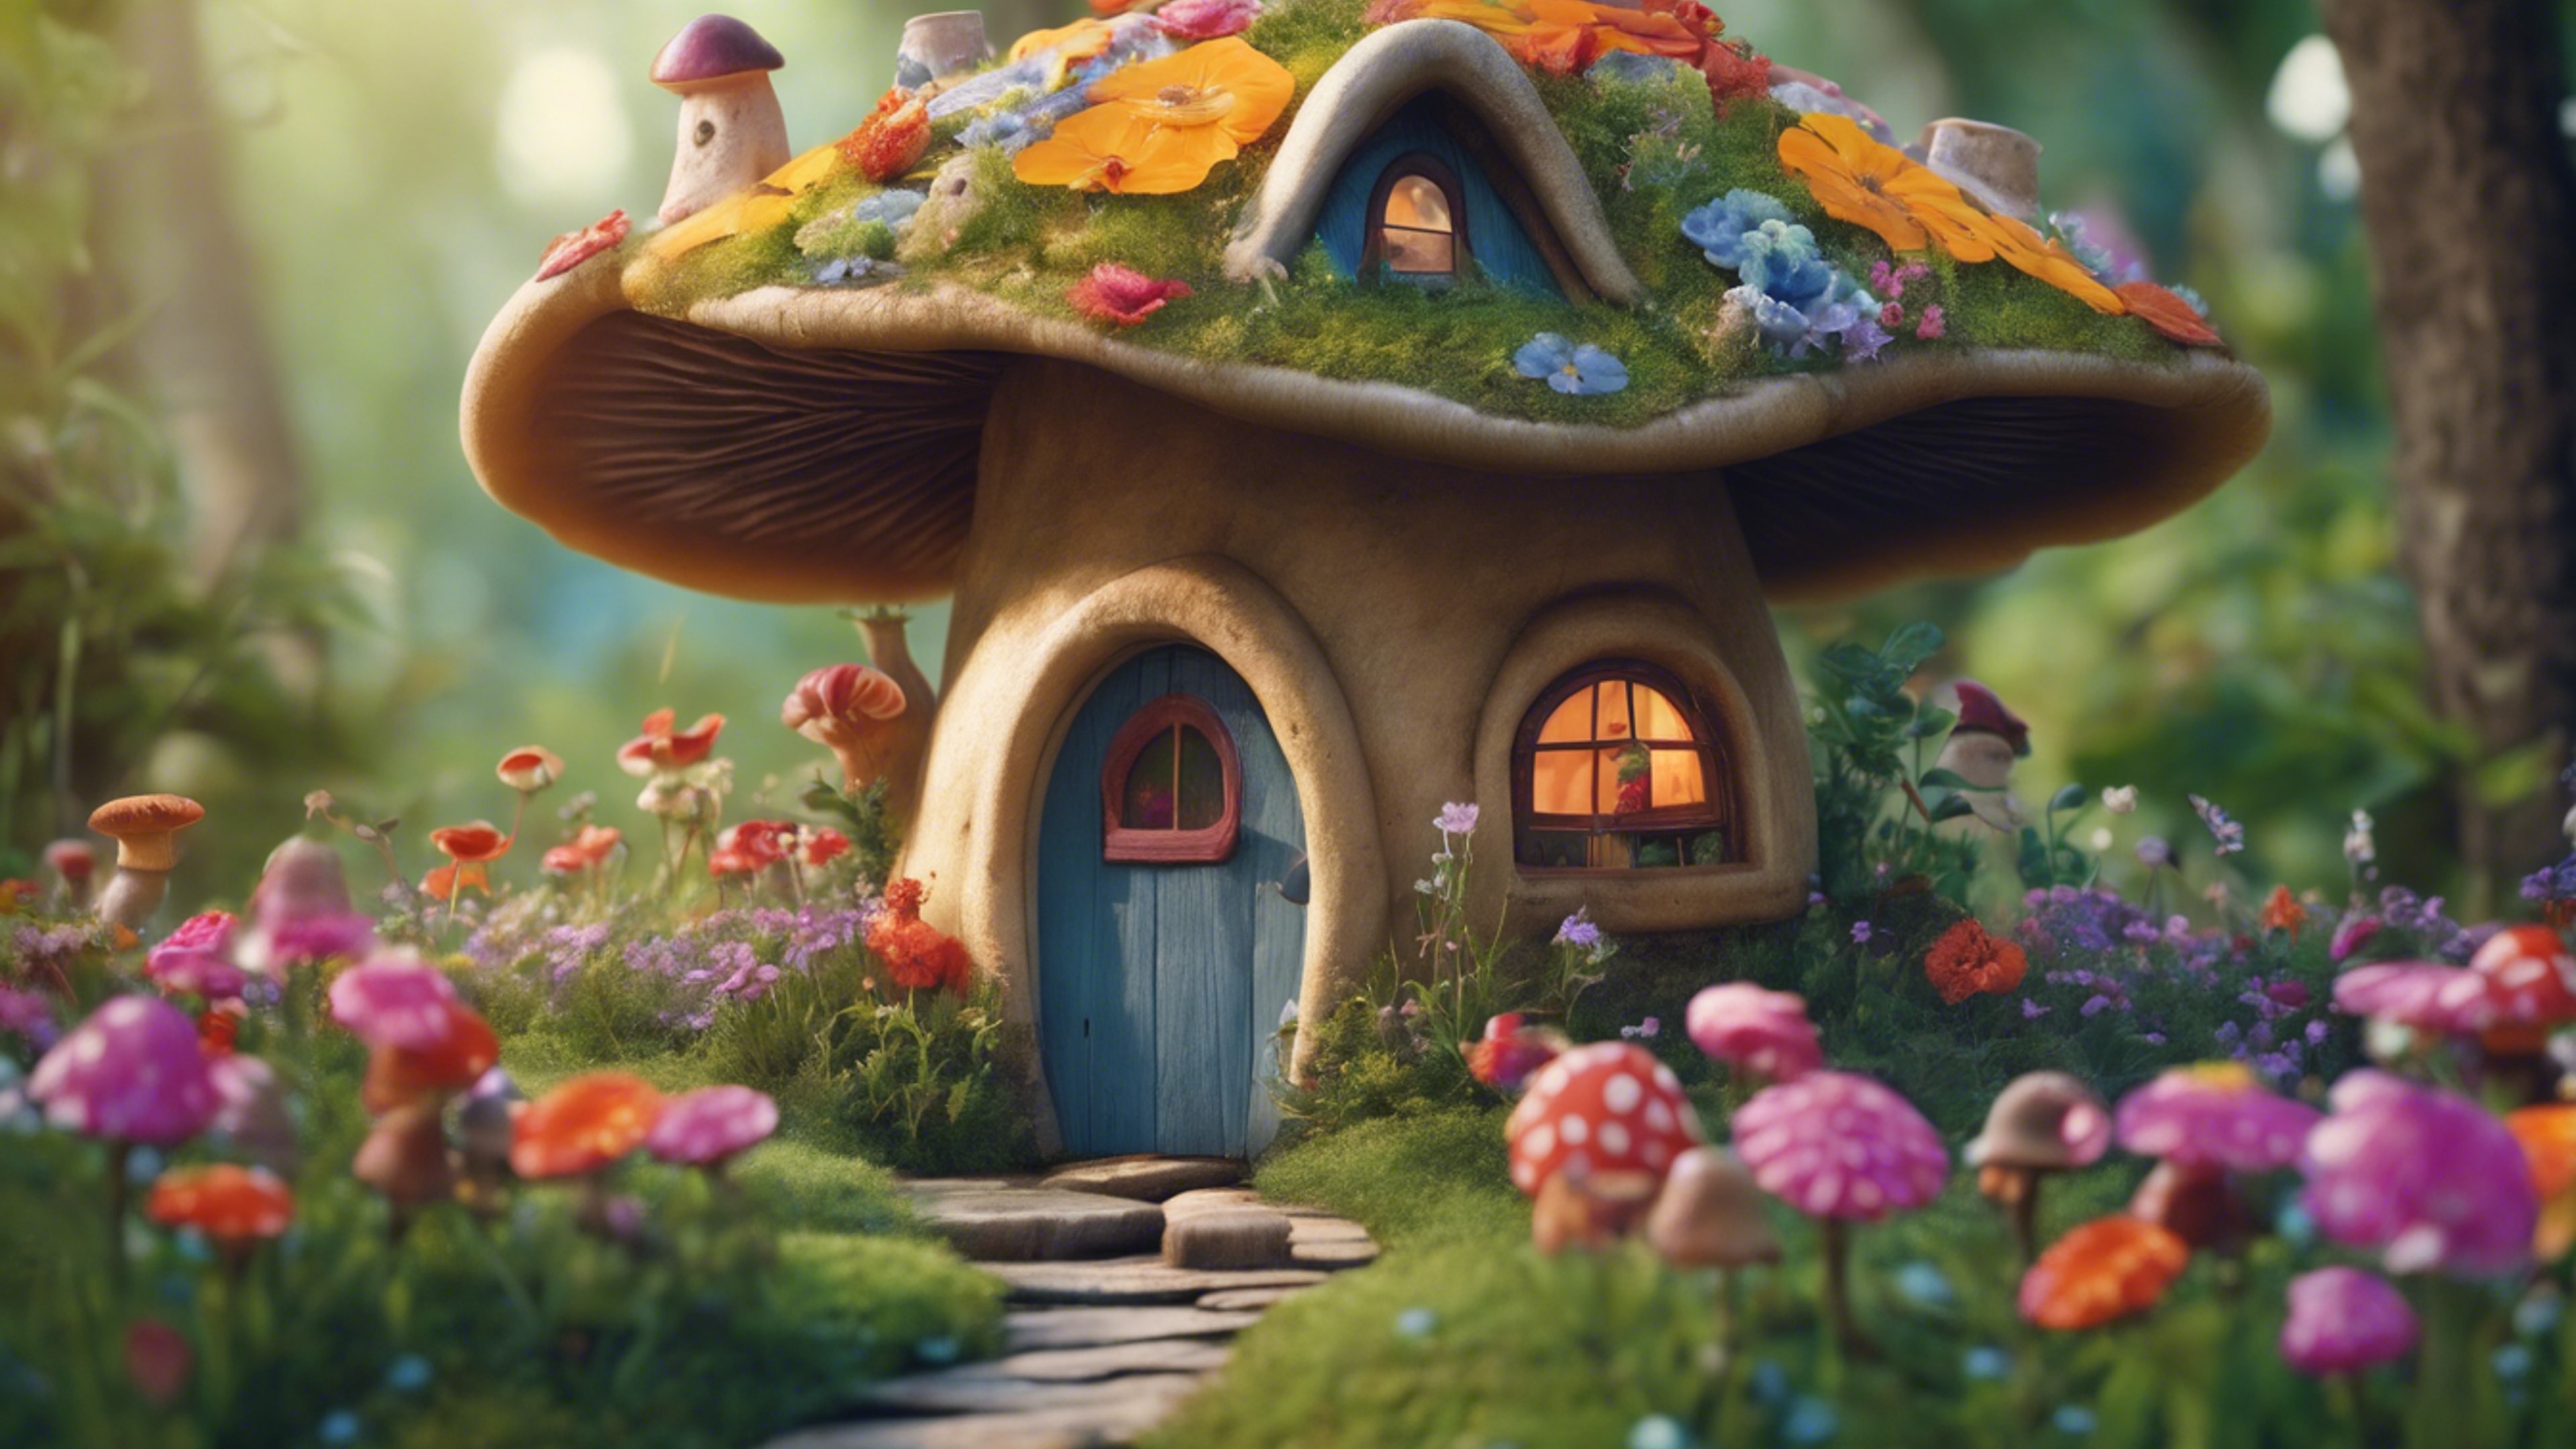 An old-fashioned, whimsical mushroom house, straight out of a children's storybook, nestled amid colorful flowers at the end of a winding path. Hình nền[bbbff29f860842789321]